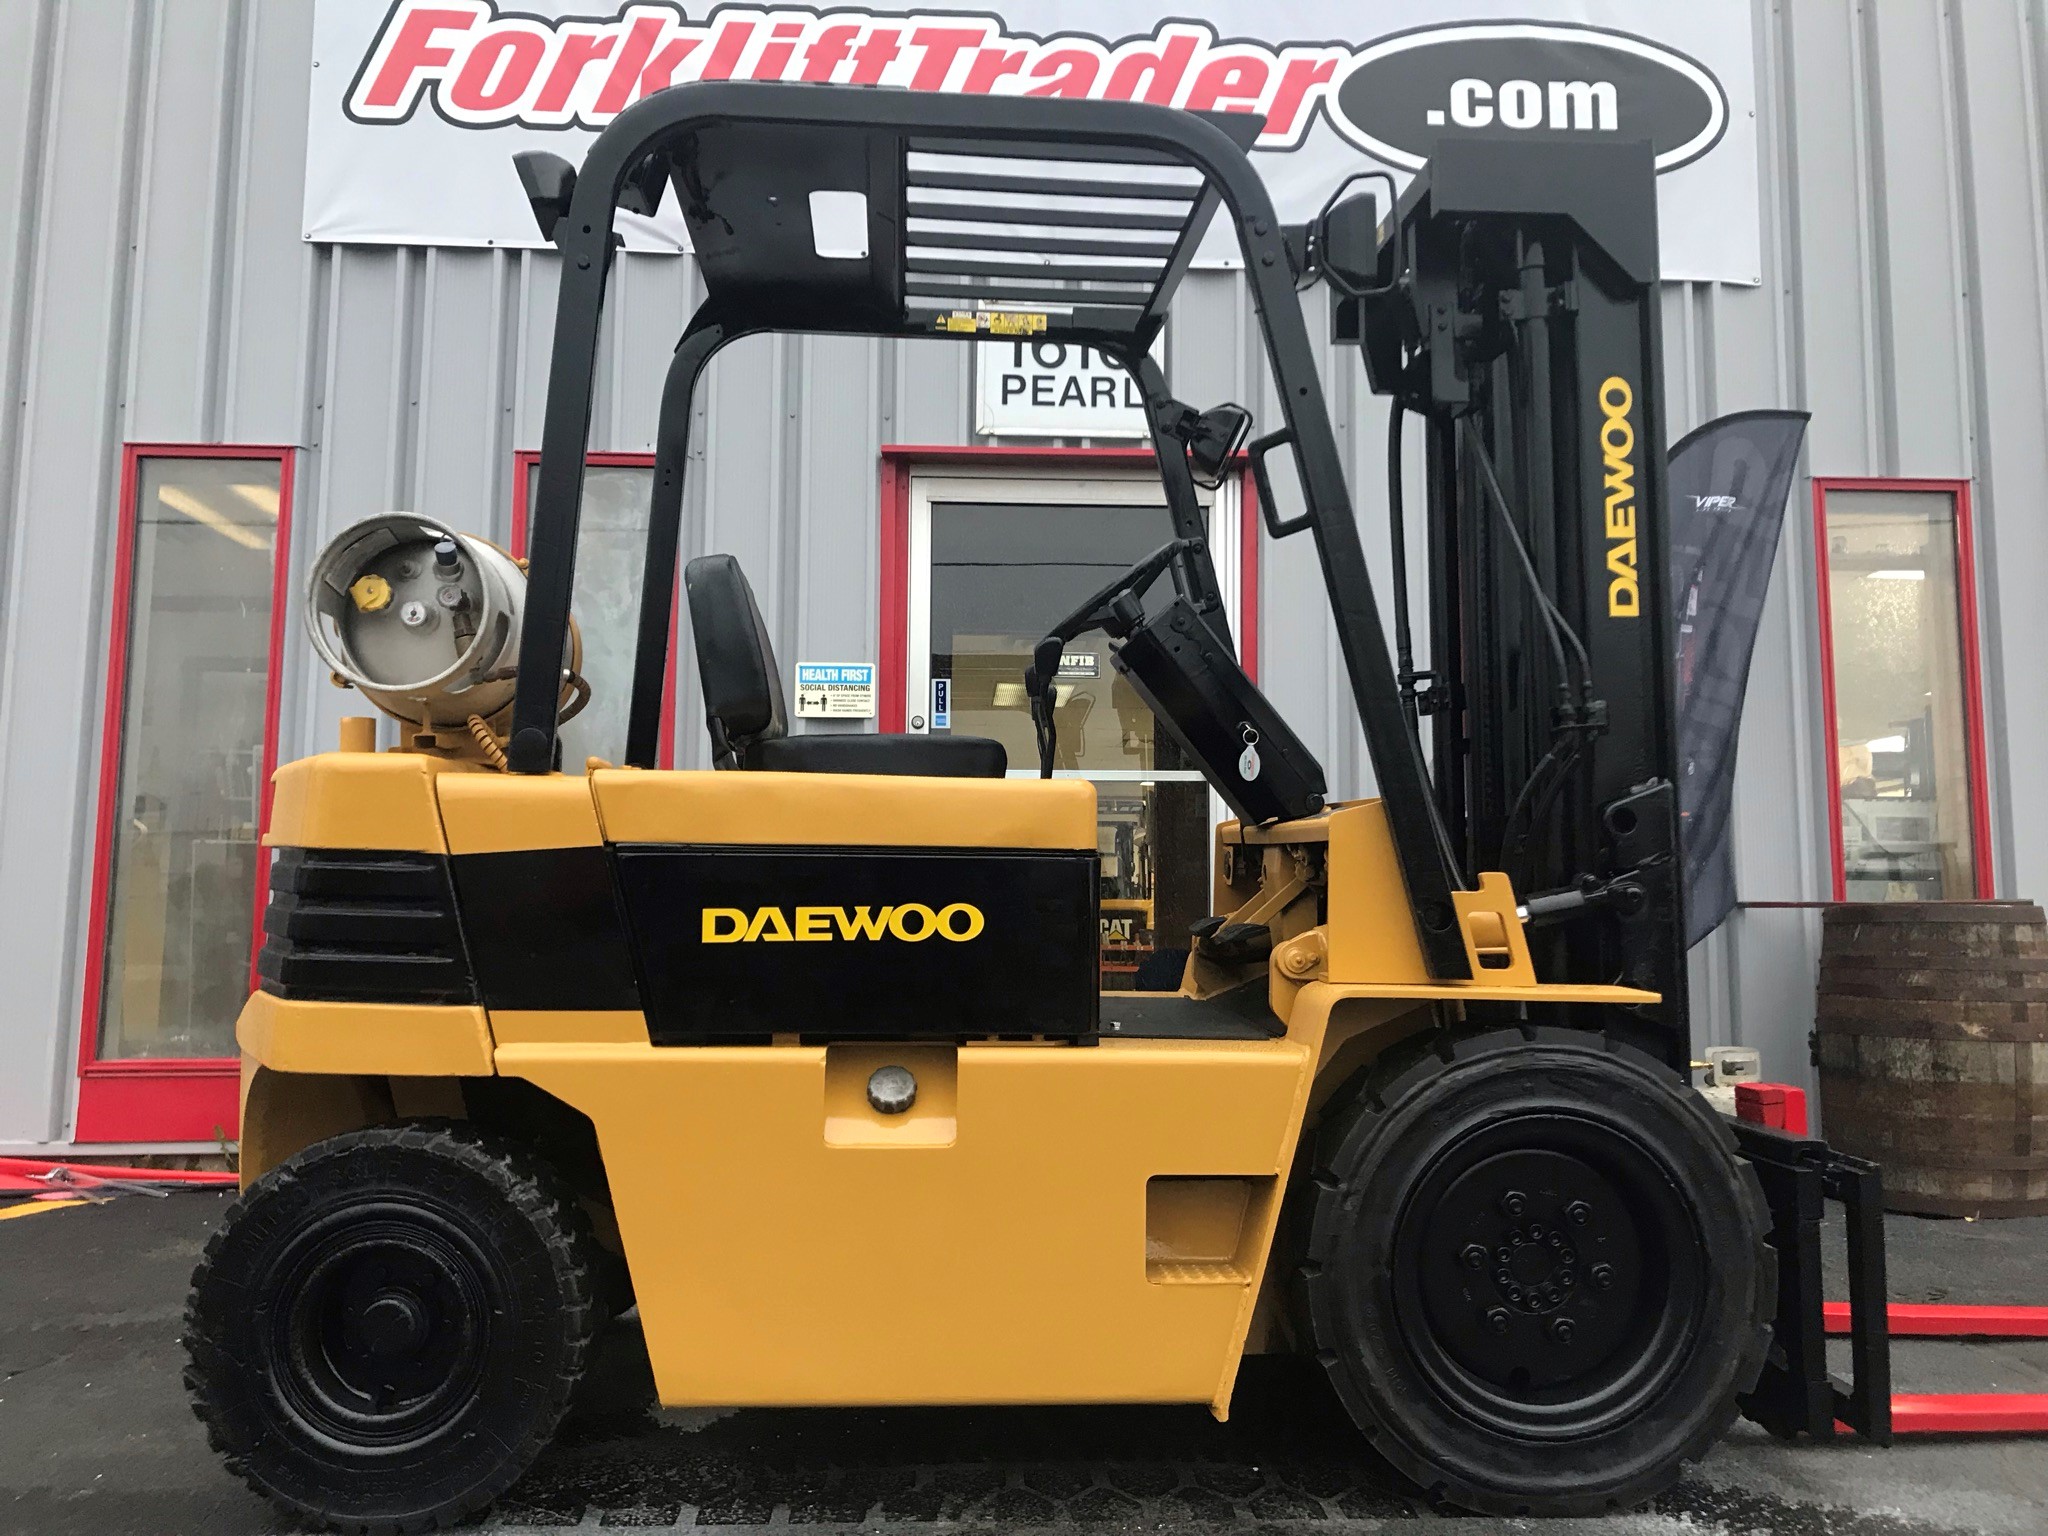 189" lift height yellow daewoo forklift for sale